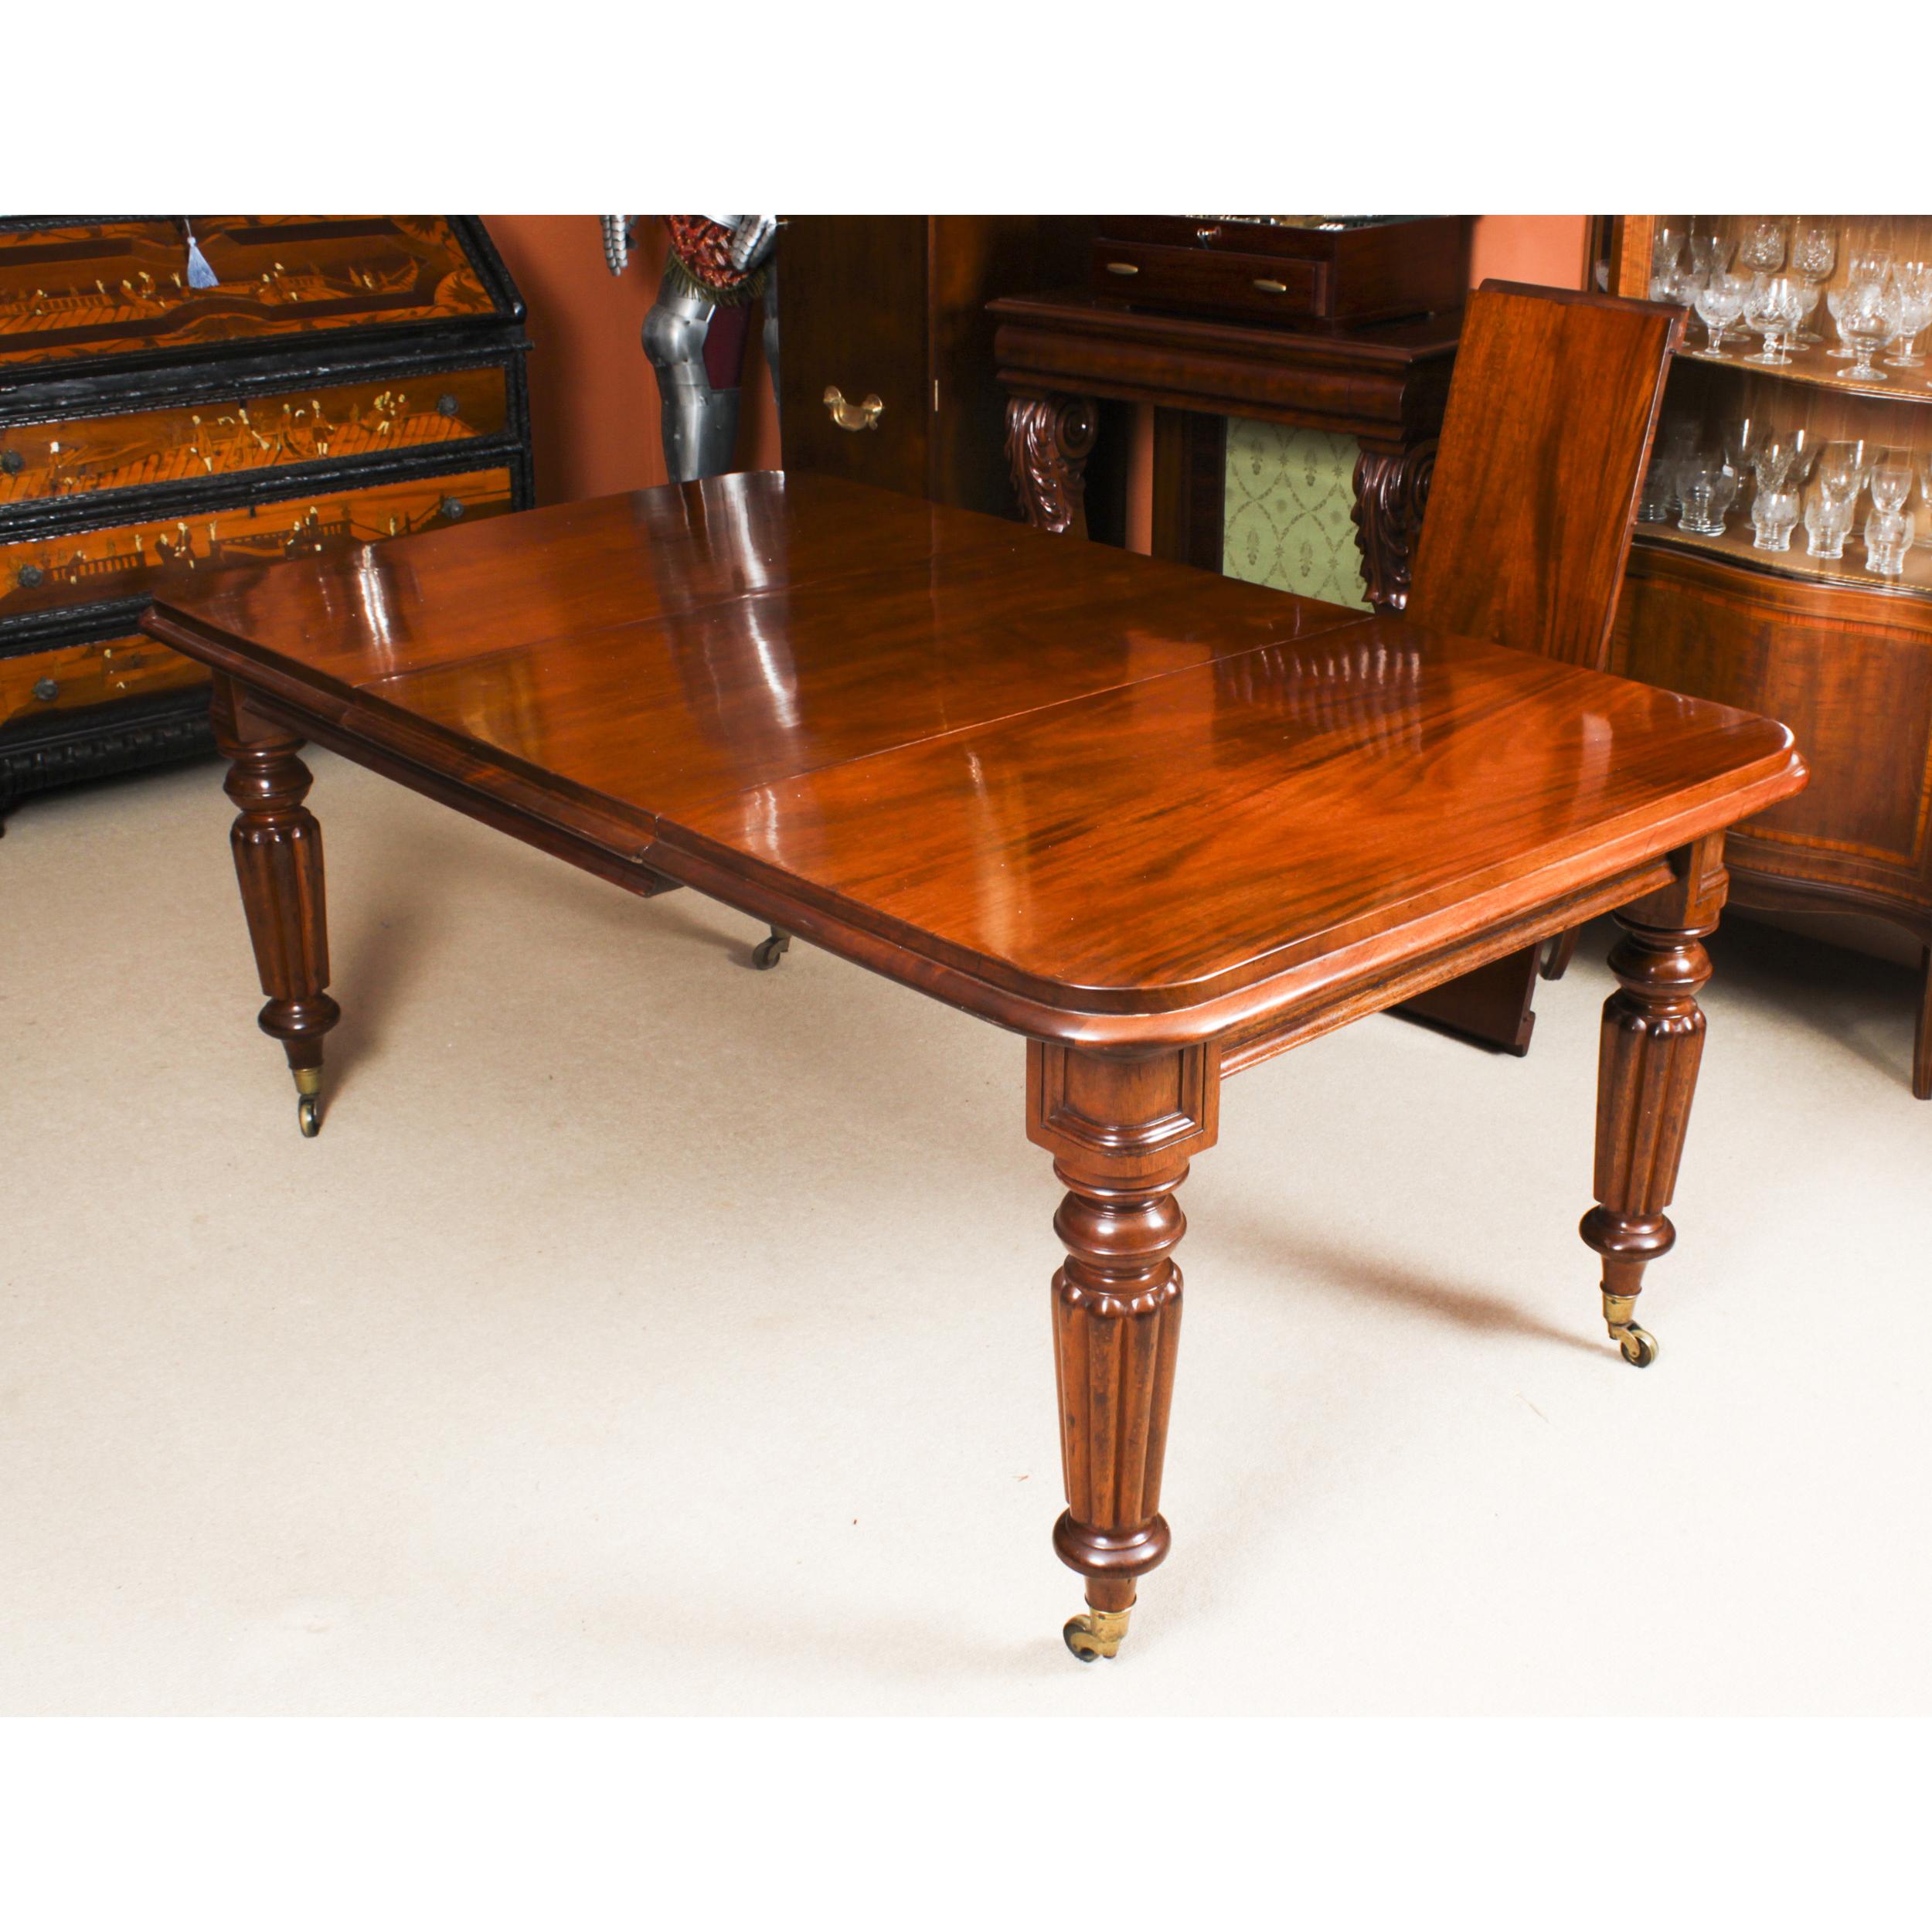 Mid-19th Century Antique Early Victorian Extending Dining Table by Gillows 19th C & 8 Chairs